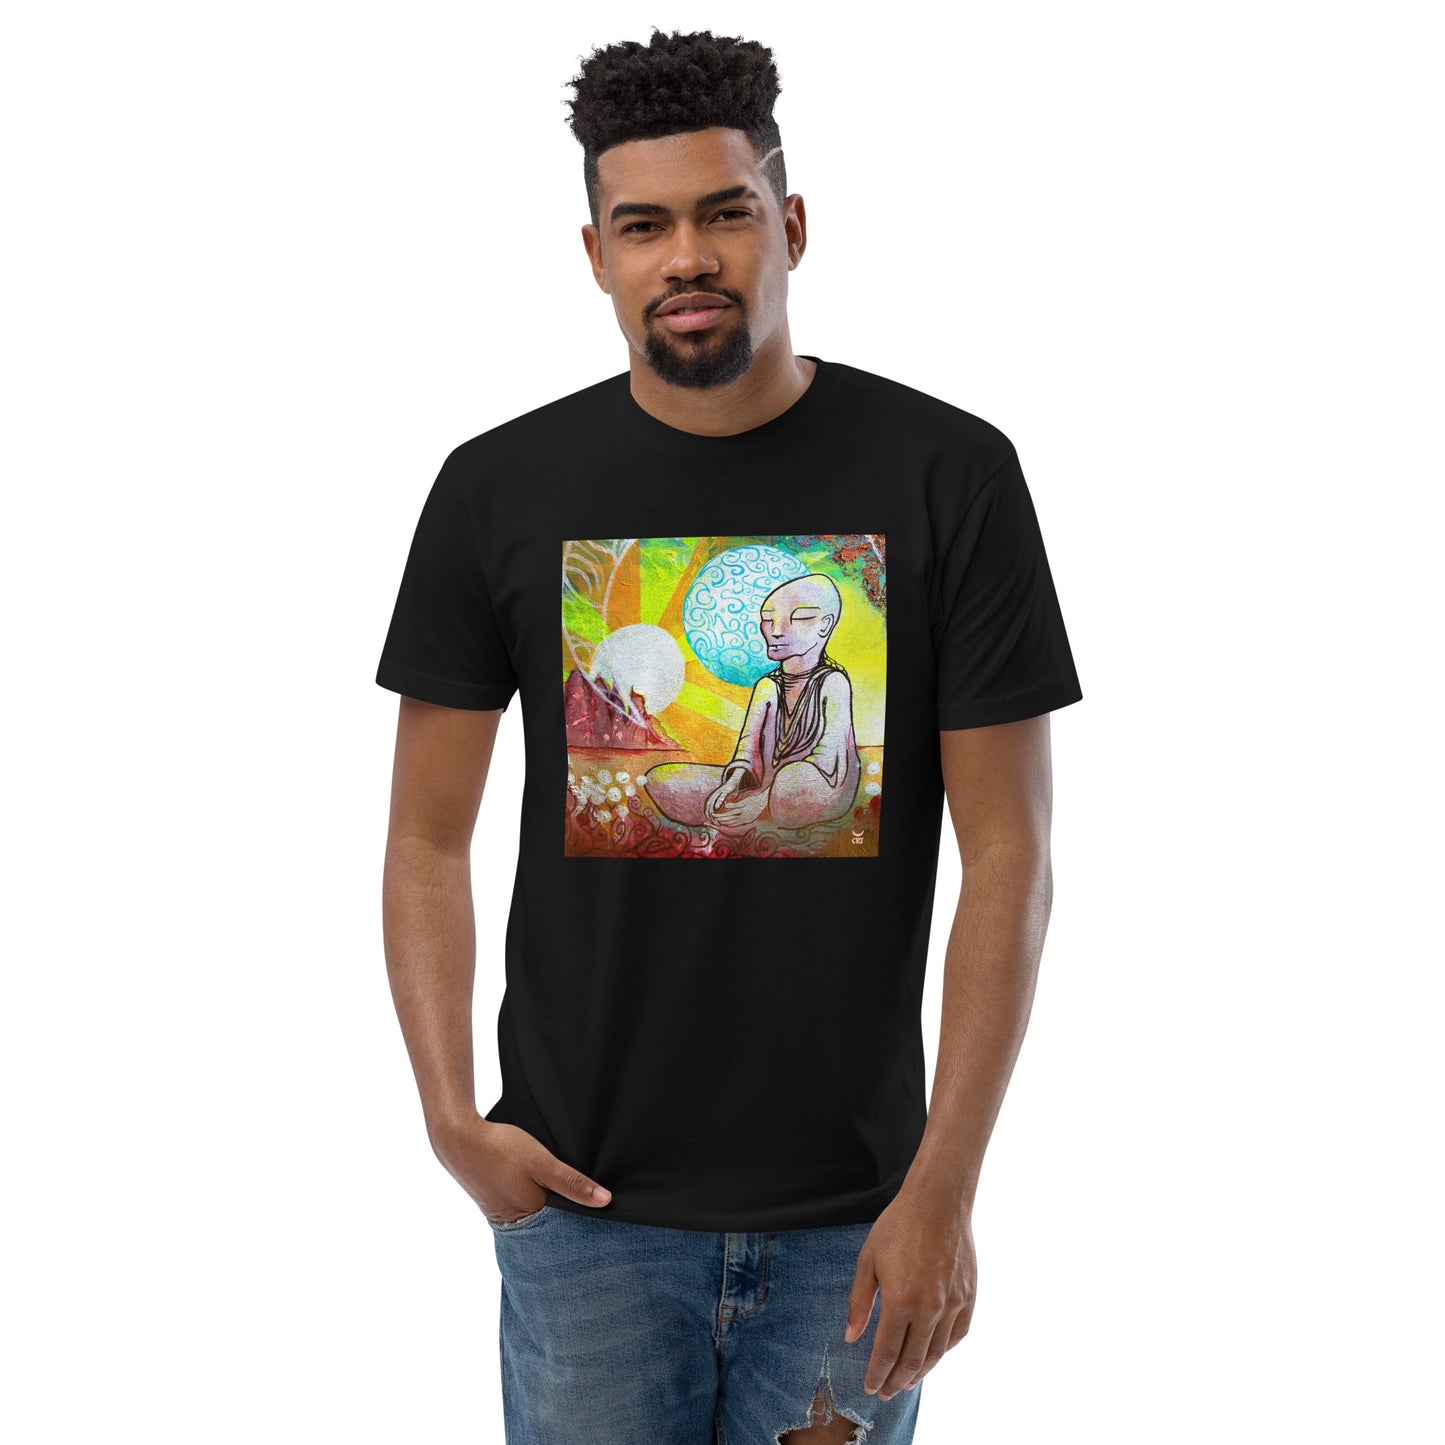 Meditation Man - Men's Fitted Tee